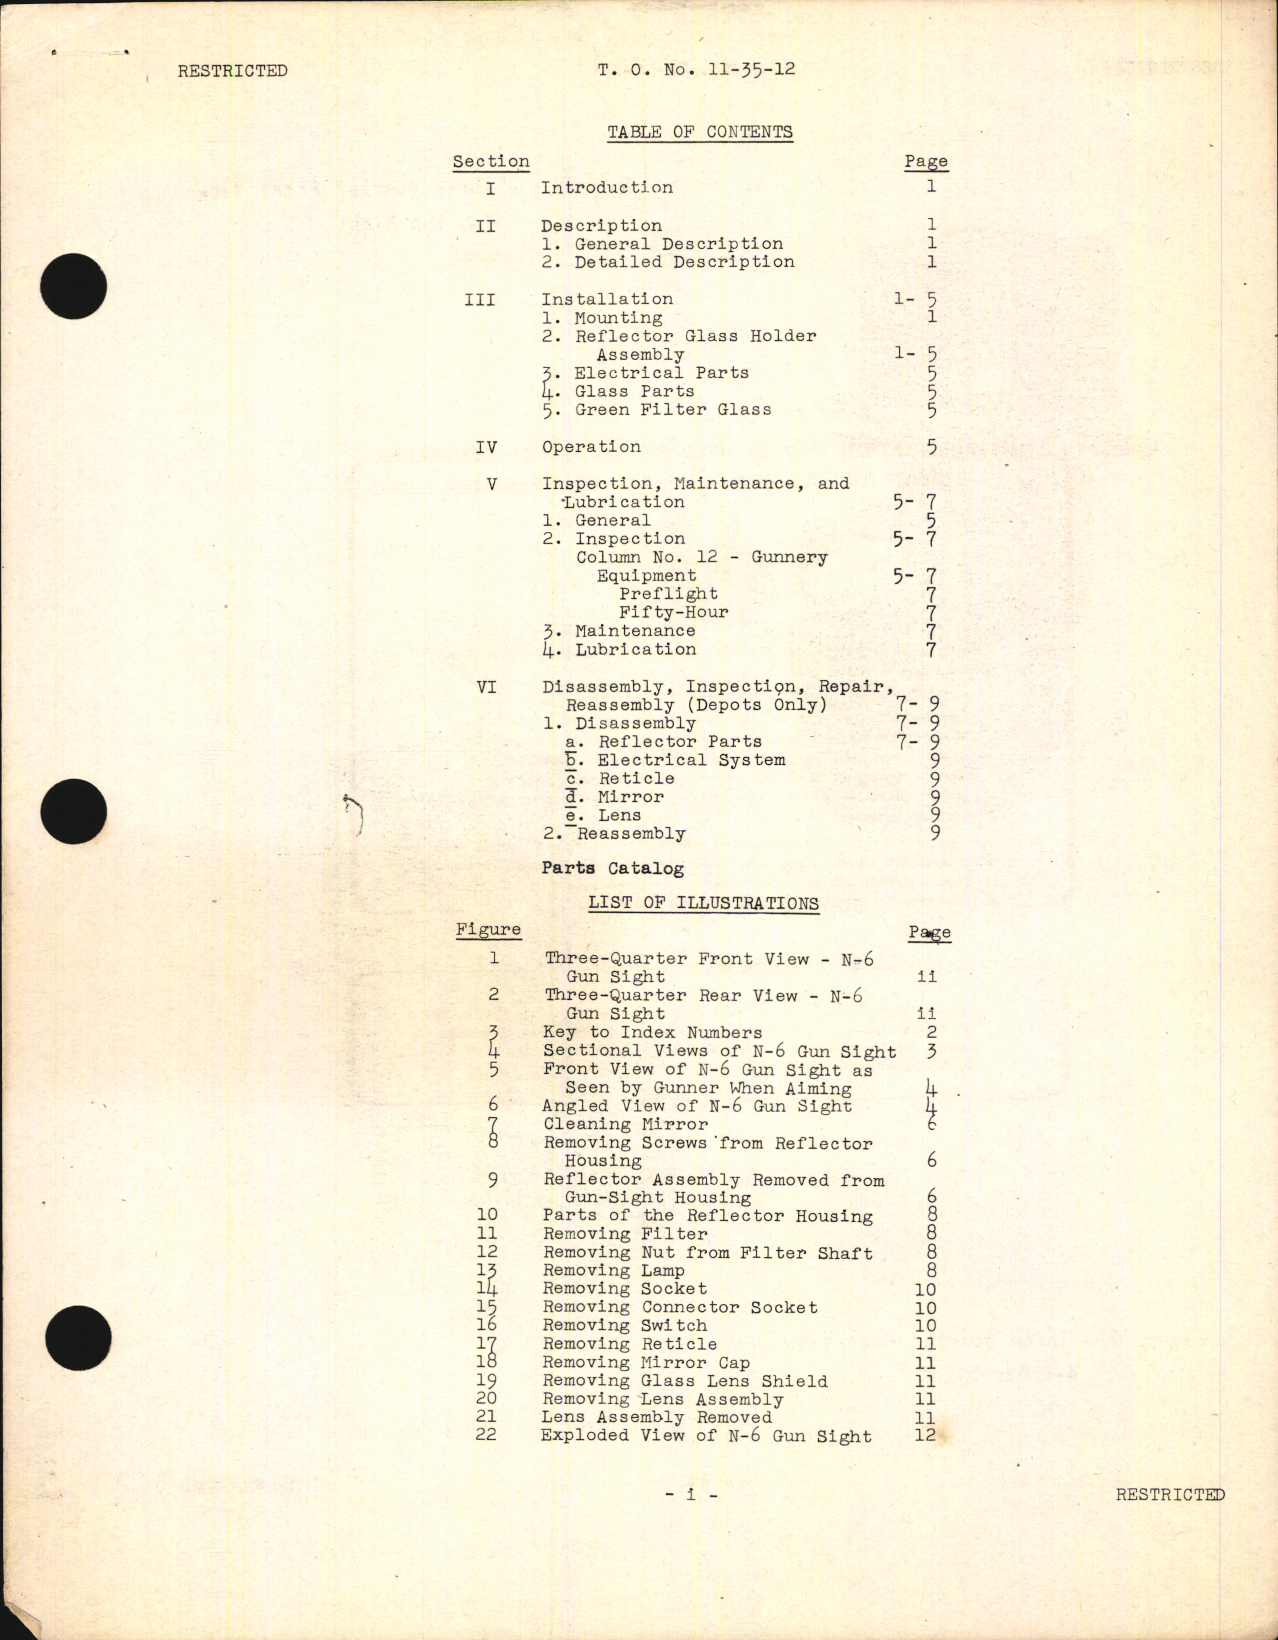 Sample page 5 from AirCorps Library document: Handbook of Instructions with Parts Catalog for Type N-6 Gunsight